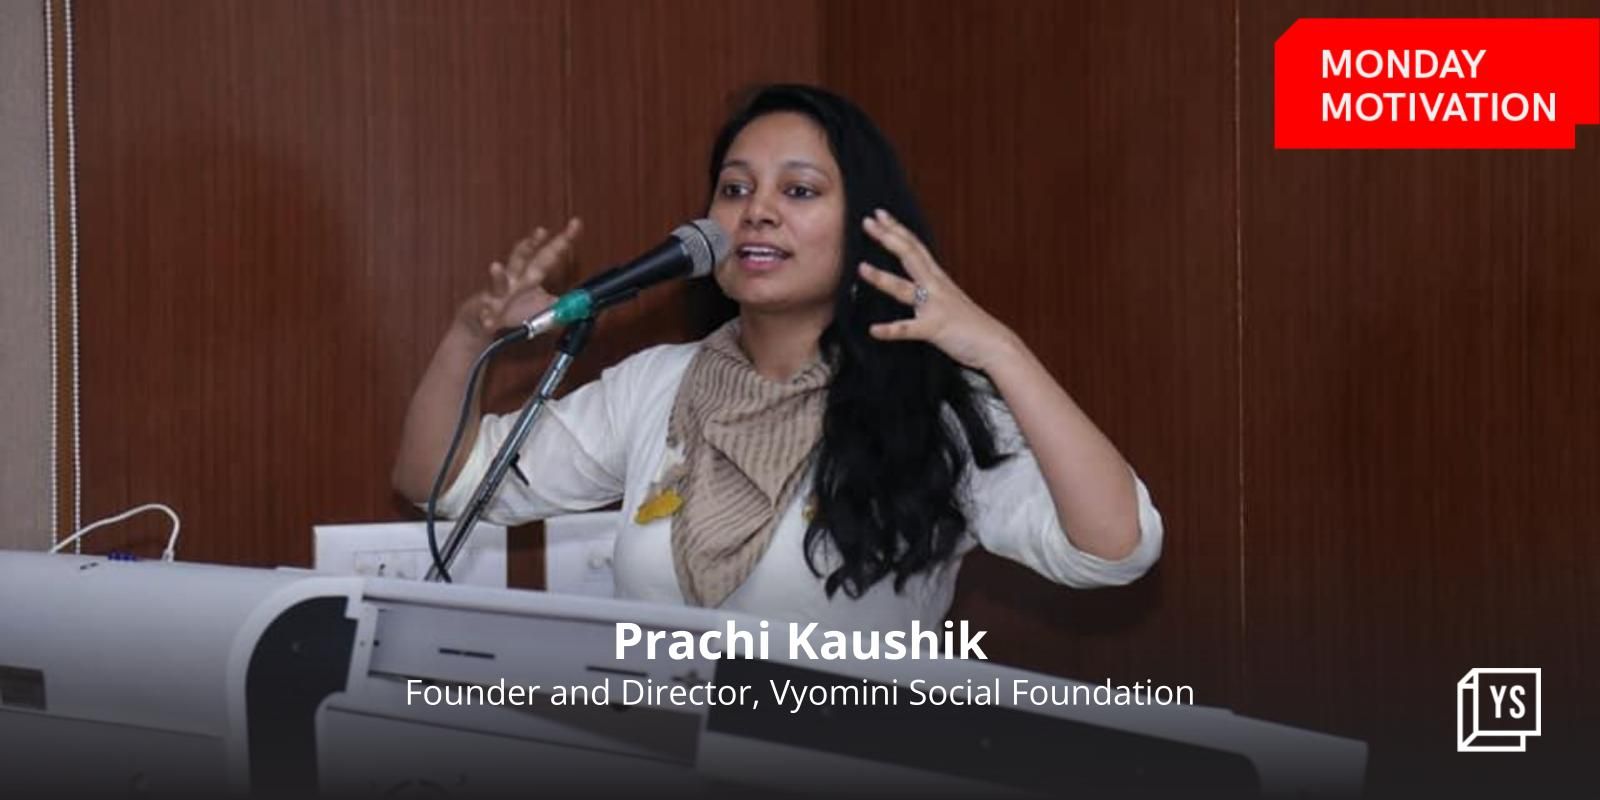 This social entrepreneur brings menstrual health, women’s empowerment to the forefront